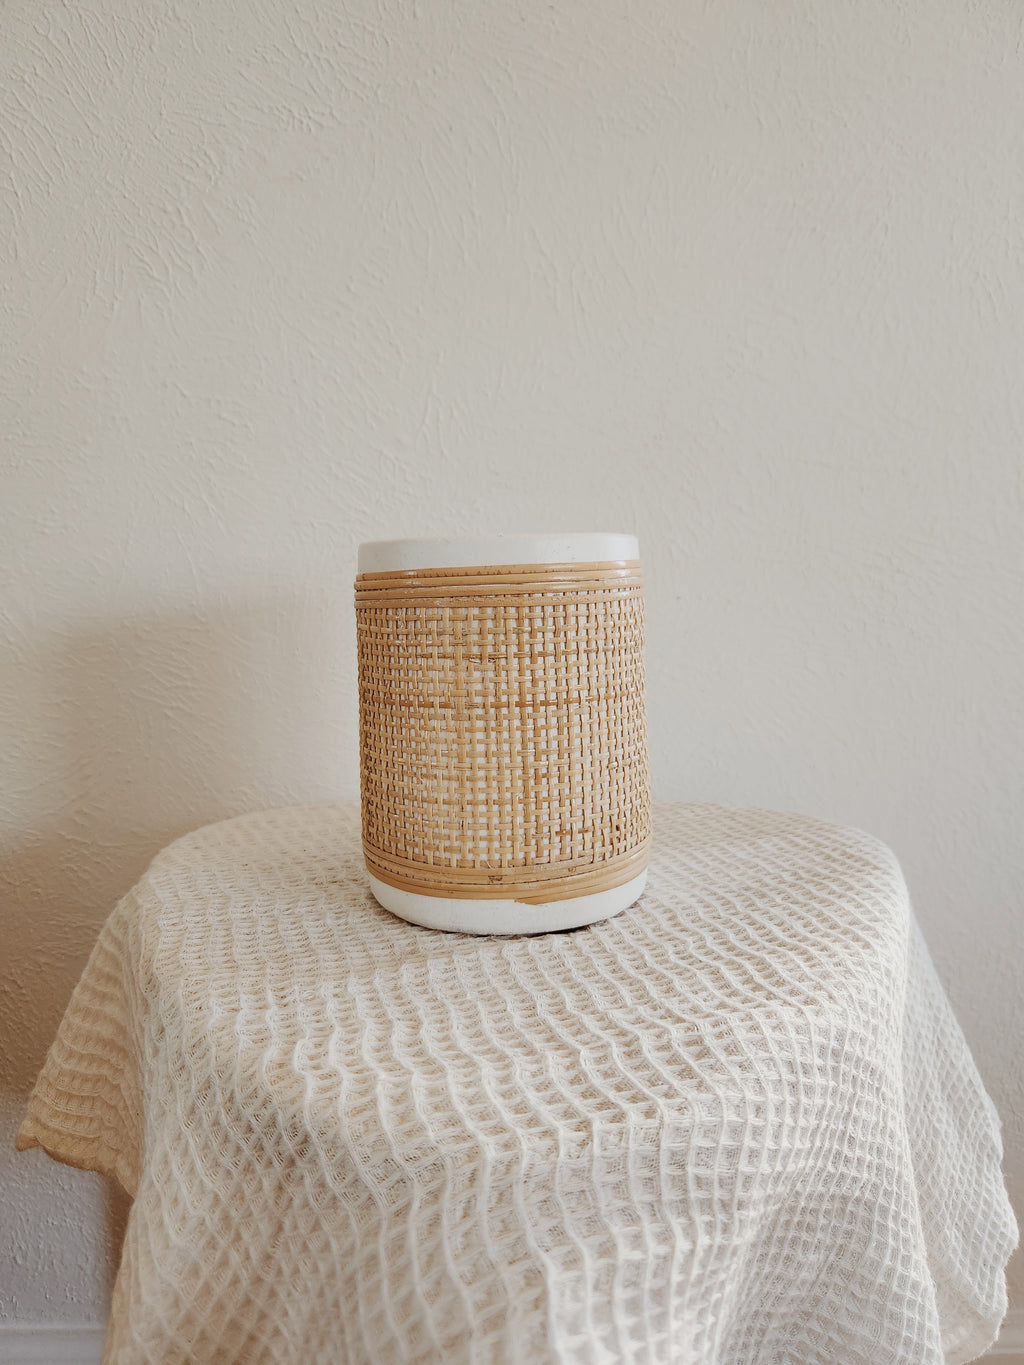 Rattan Vase for a plant | Earthy Home Decor | Terracotta Clay Ceramic |